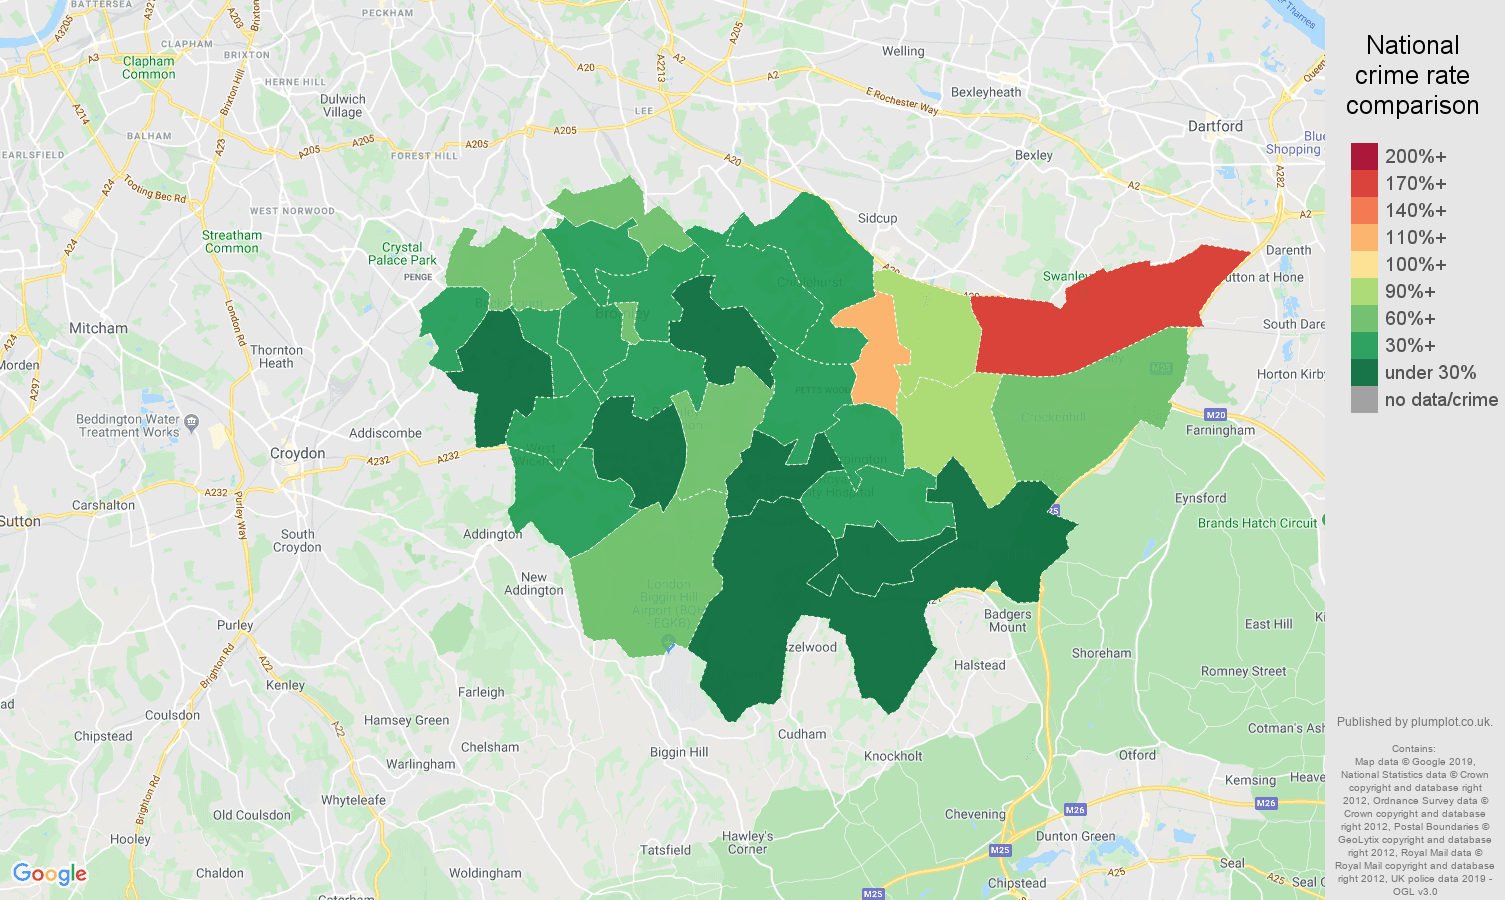 Bromley other crime rate comparison map